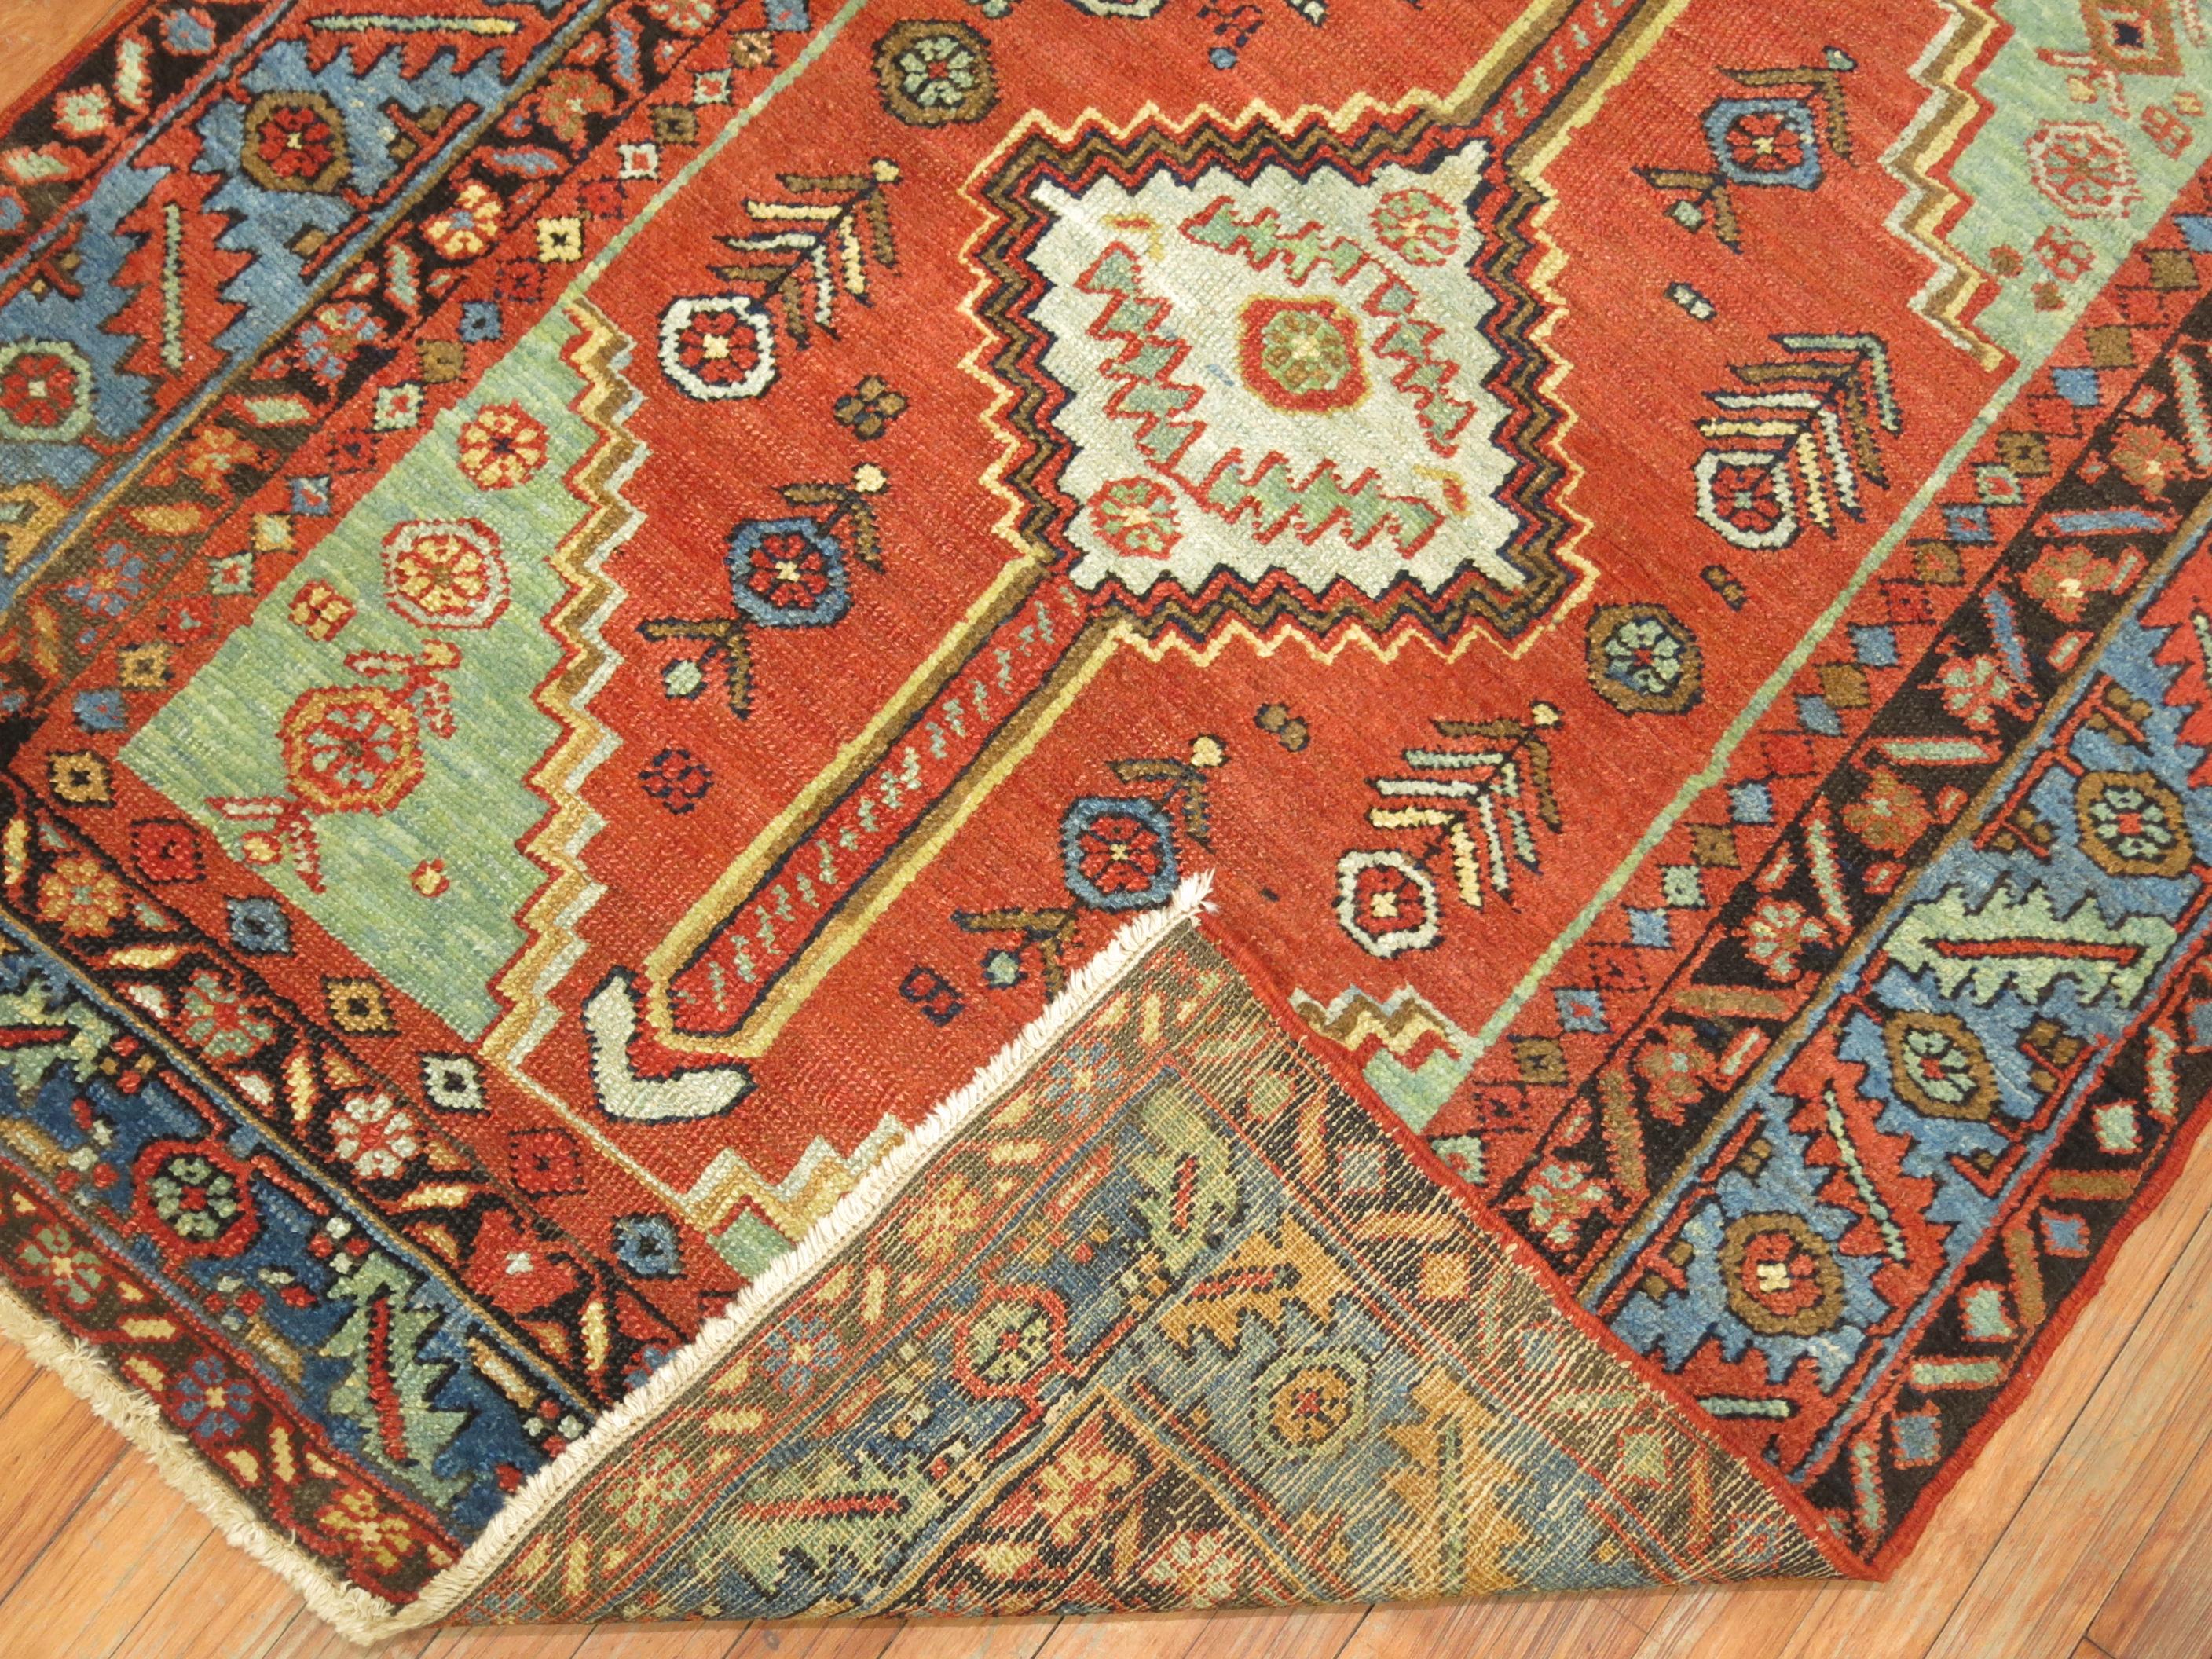 An antique Persian Heriz one of a kind Square Scatter rug.

4'1'' x 5'2''